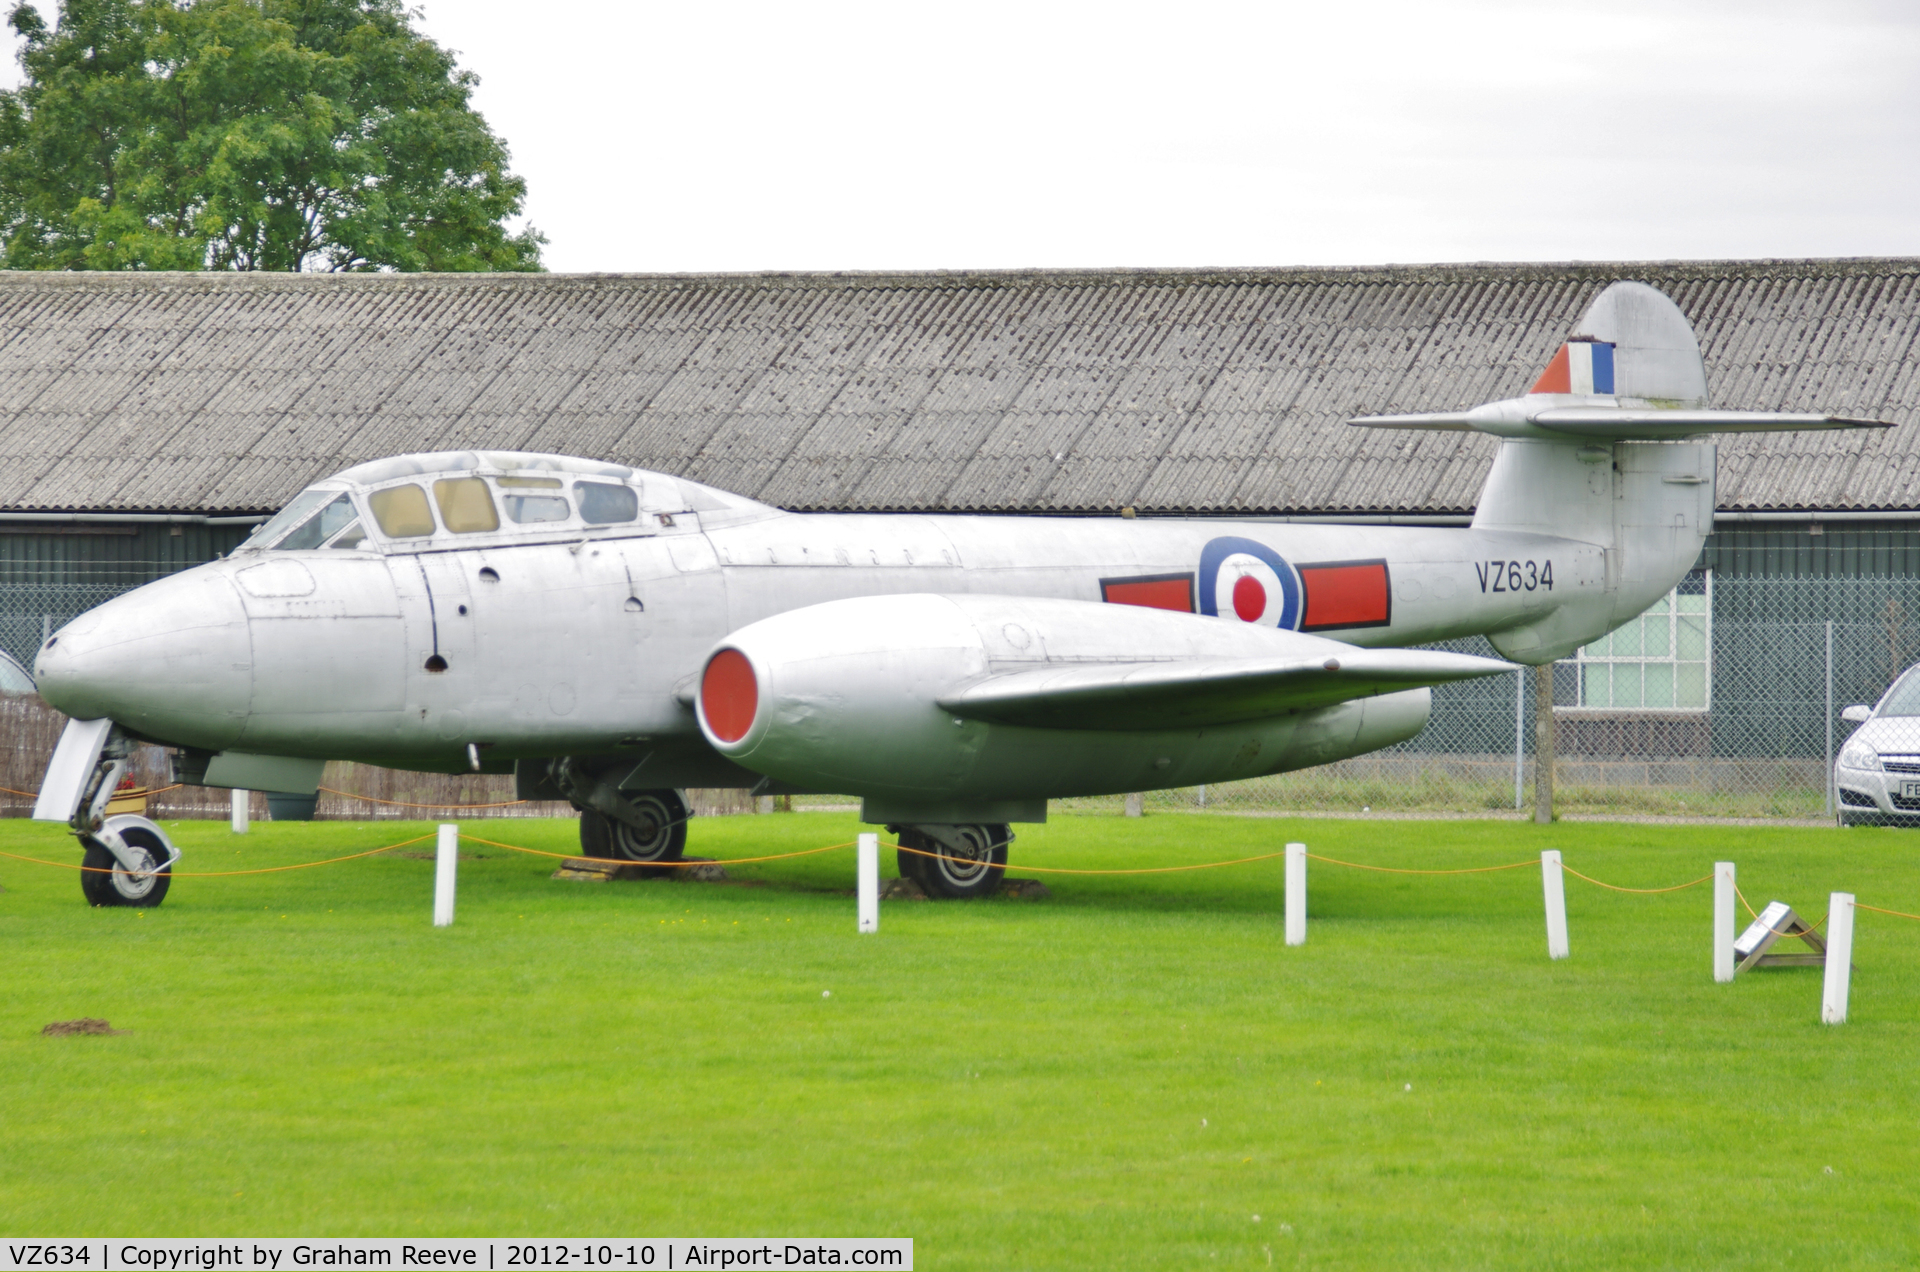 VZ634, Gloster Meteor T.7 C/N Not found VZ634, Preserved at the Newark Air Museum.